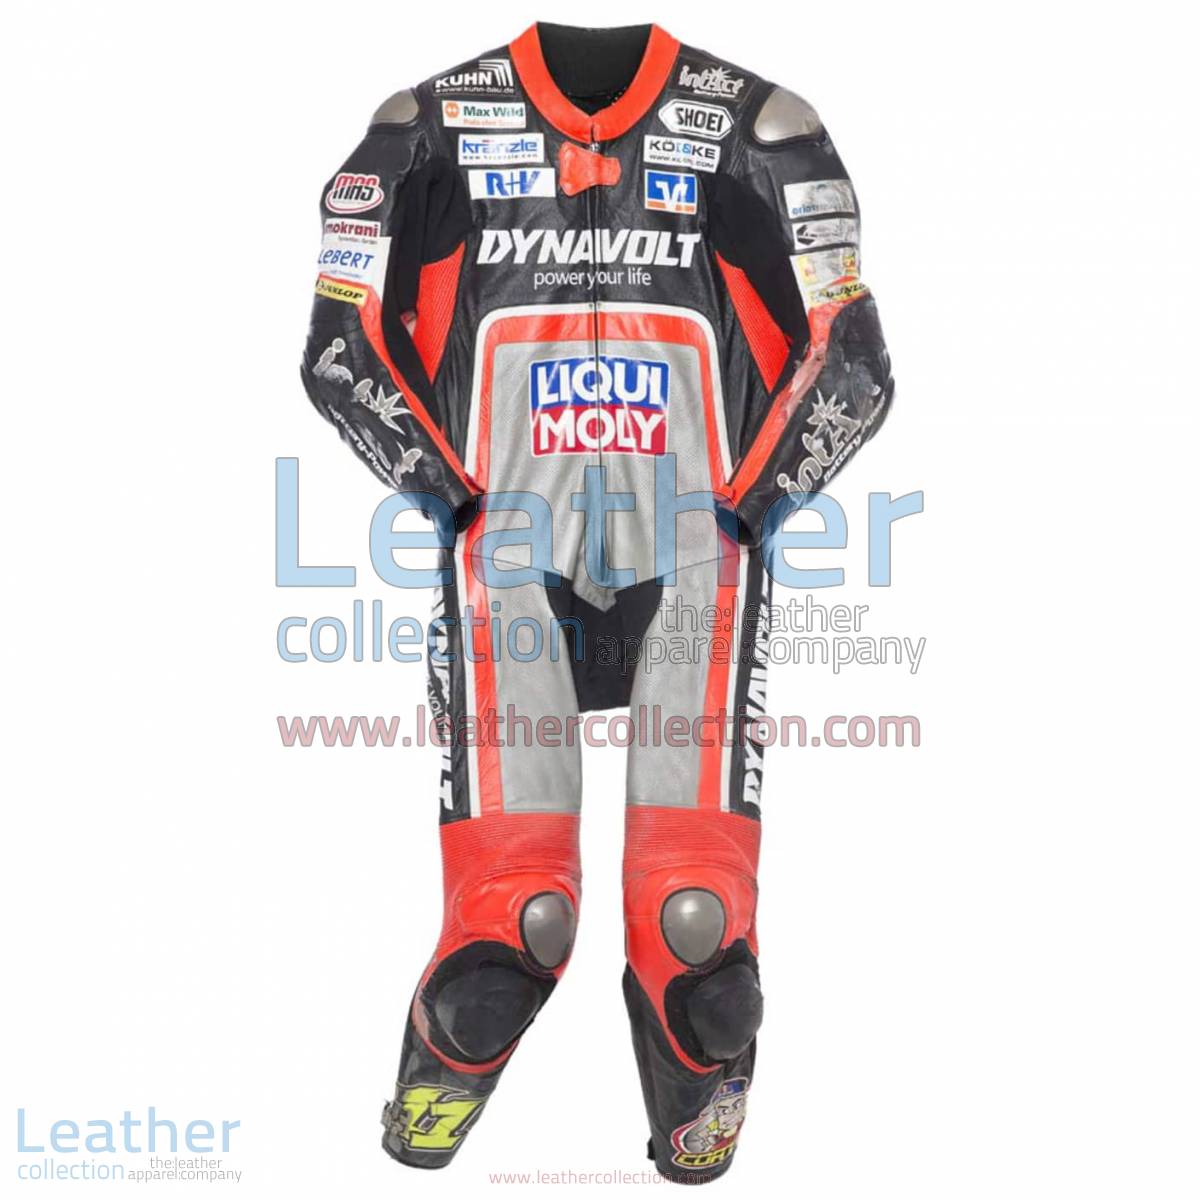 Sandro Cortese 2014 Moto2 Motorbike Leather Suit | leather suit,motorcycle suit